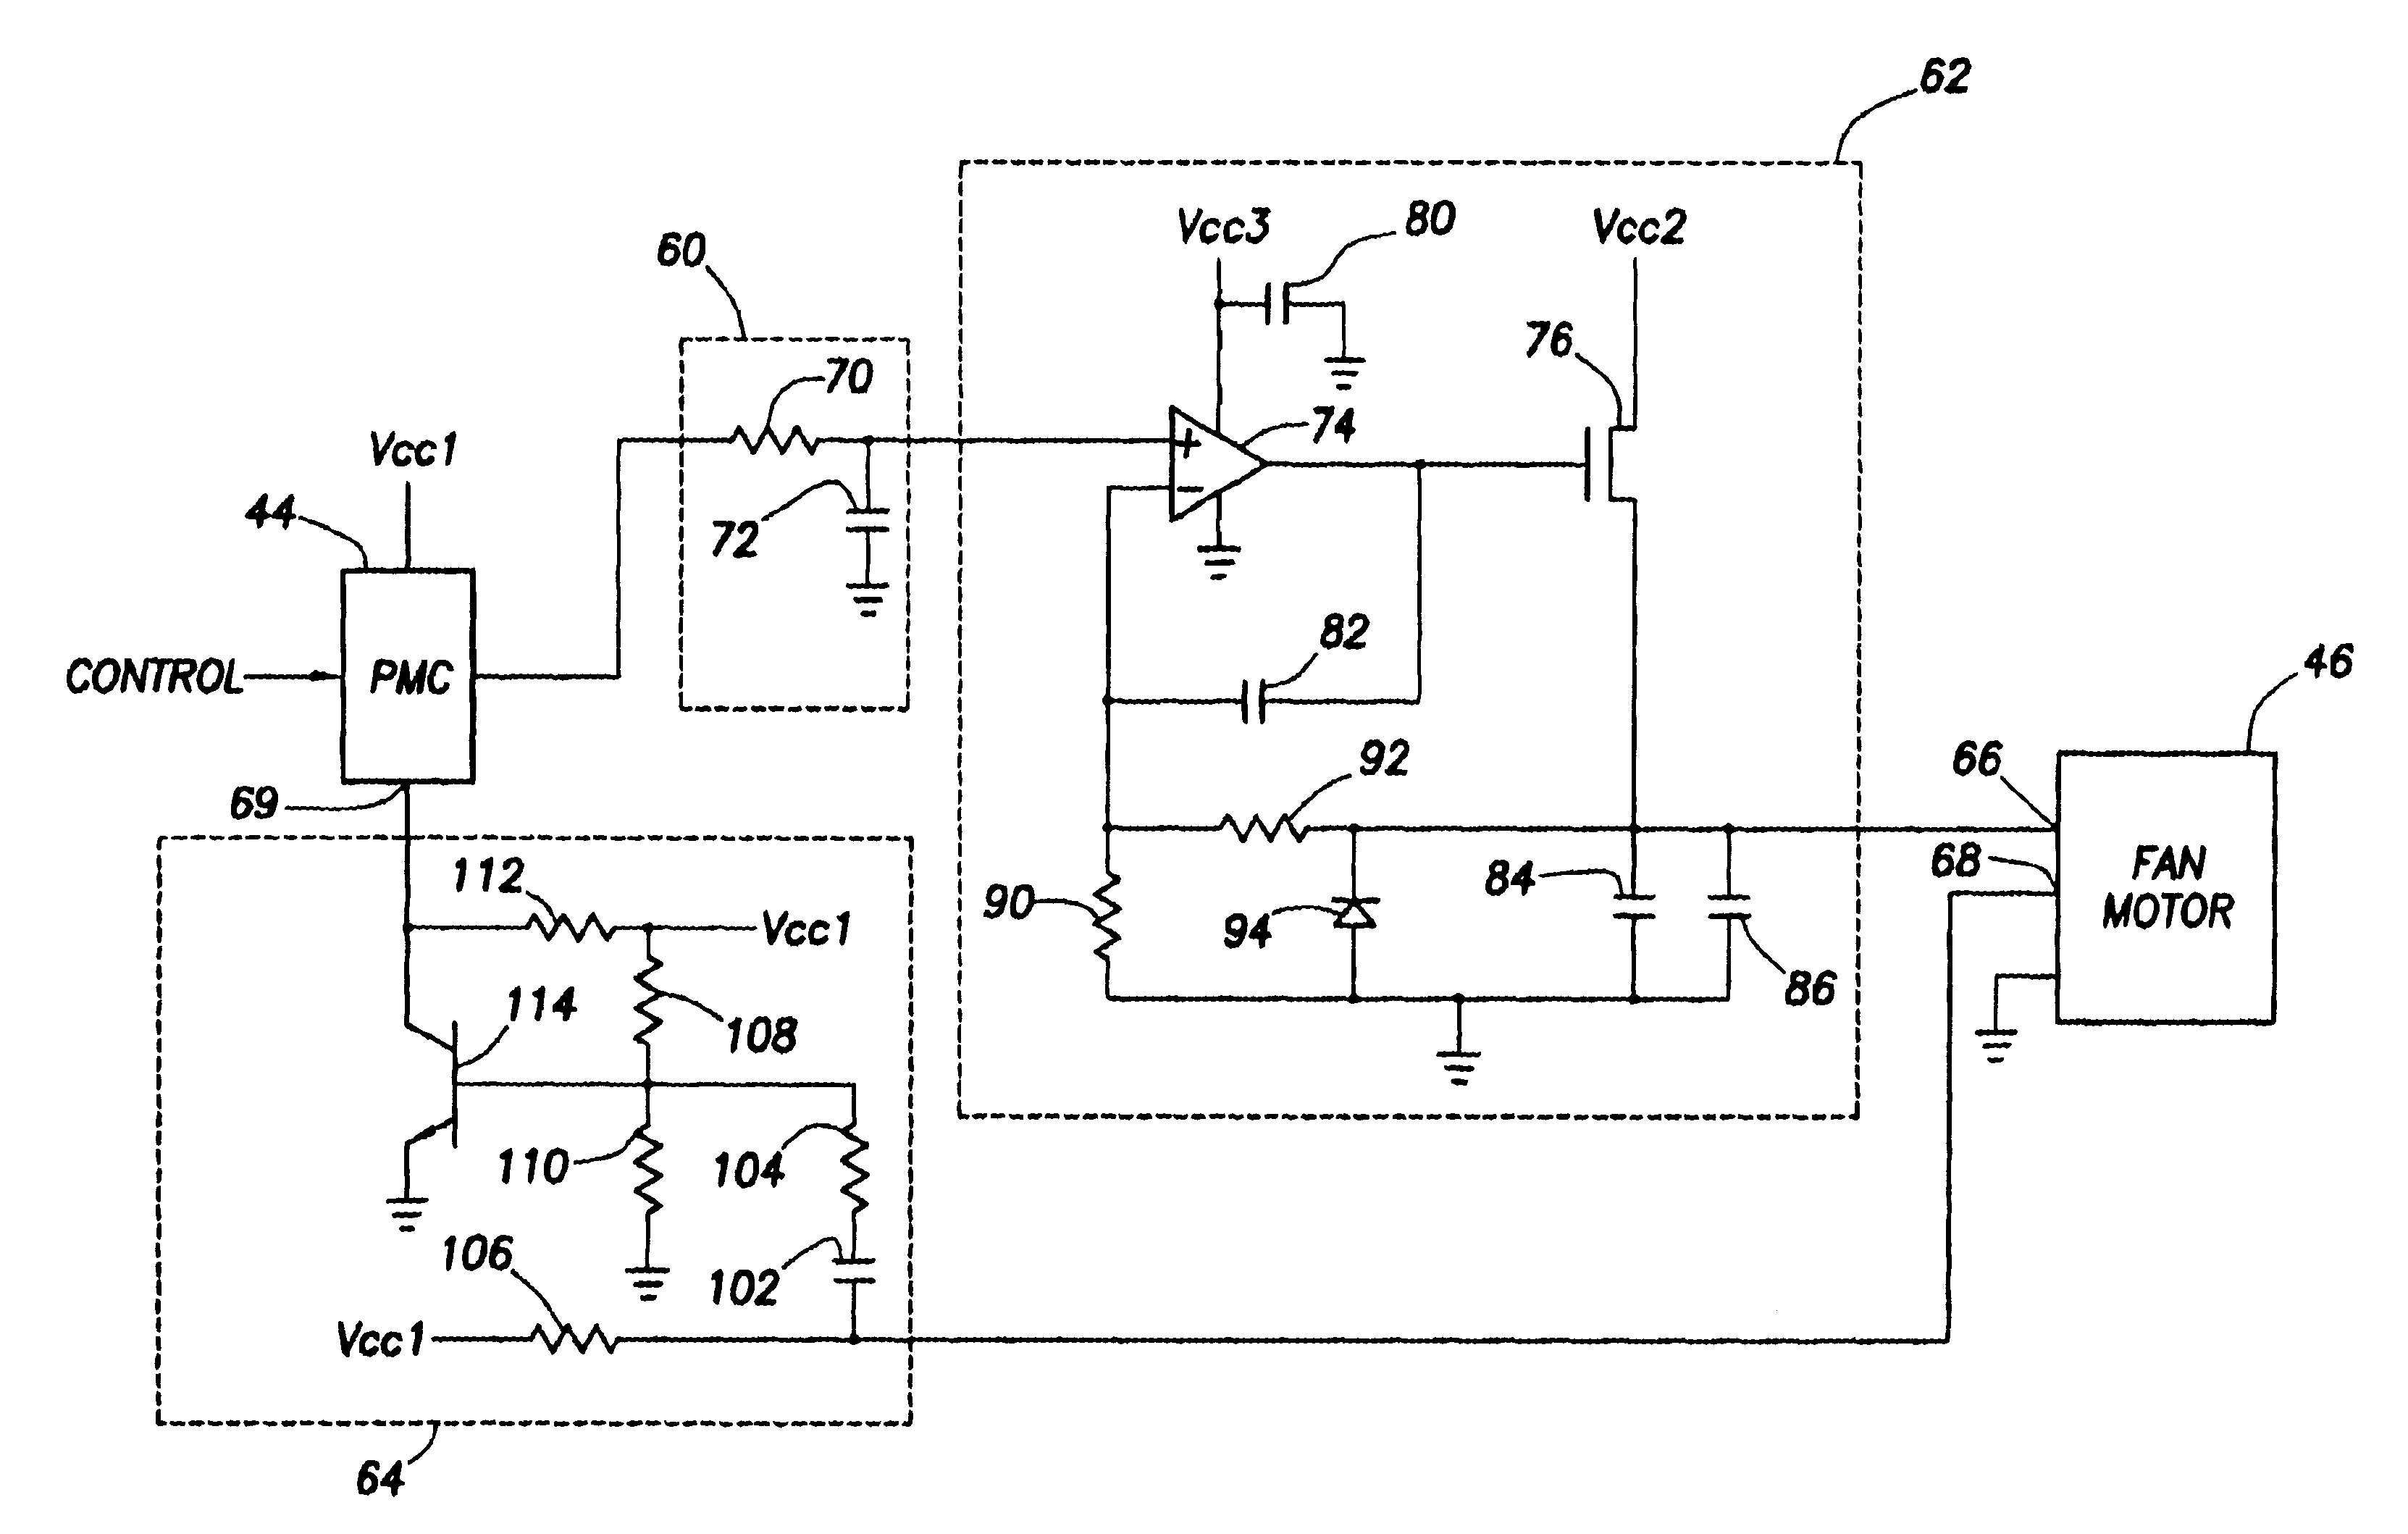 Fan speed controller with conditioned tachometer signal